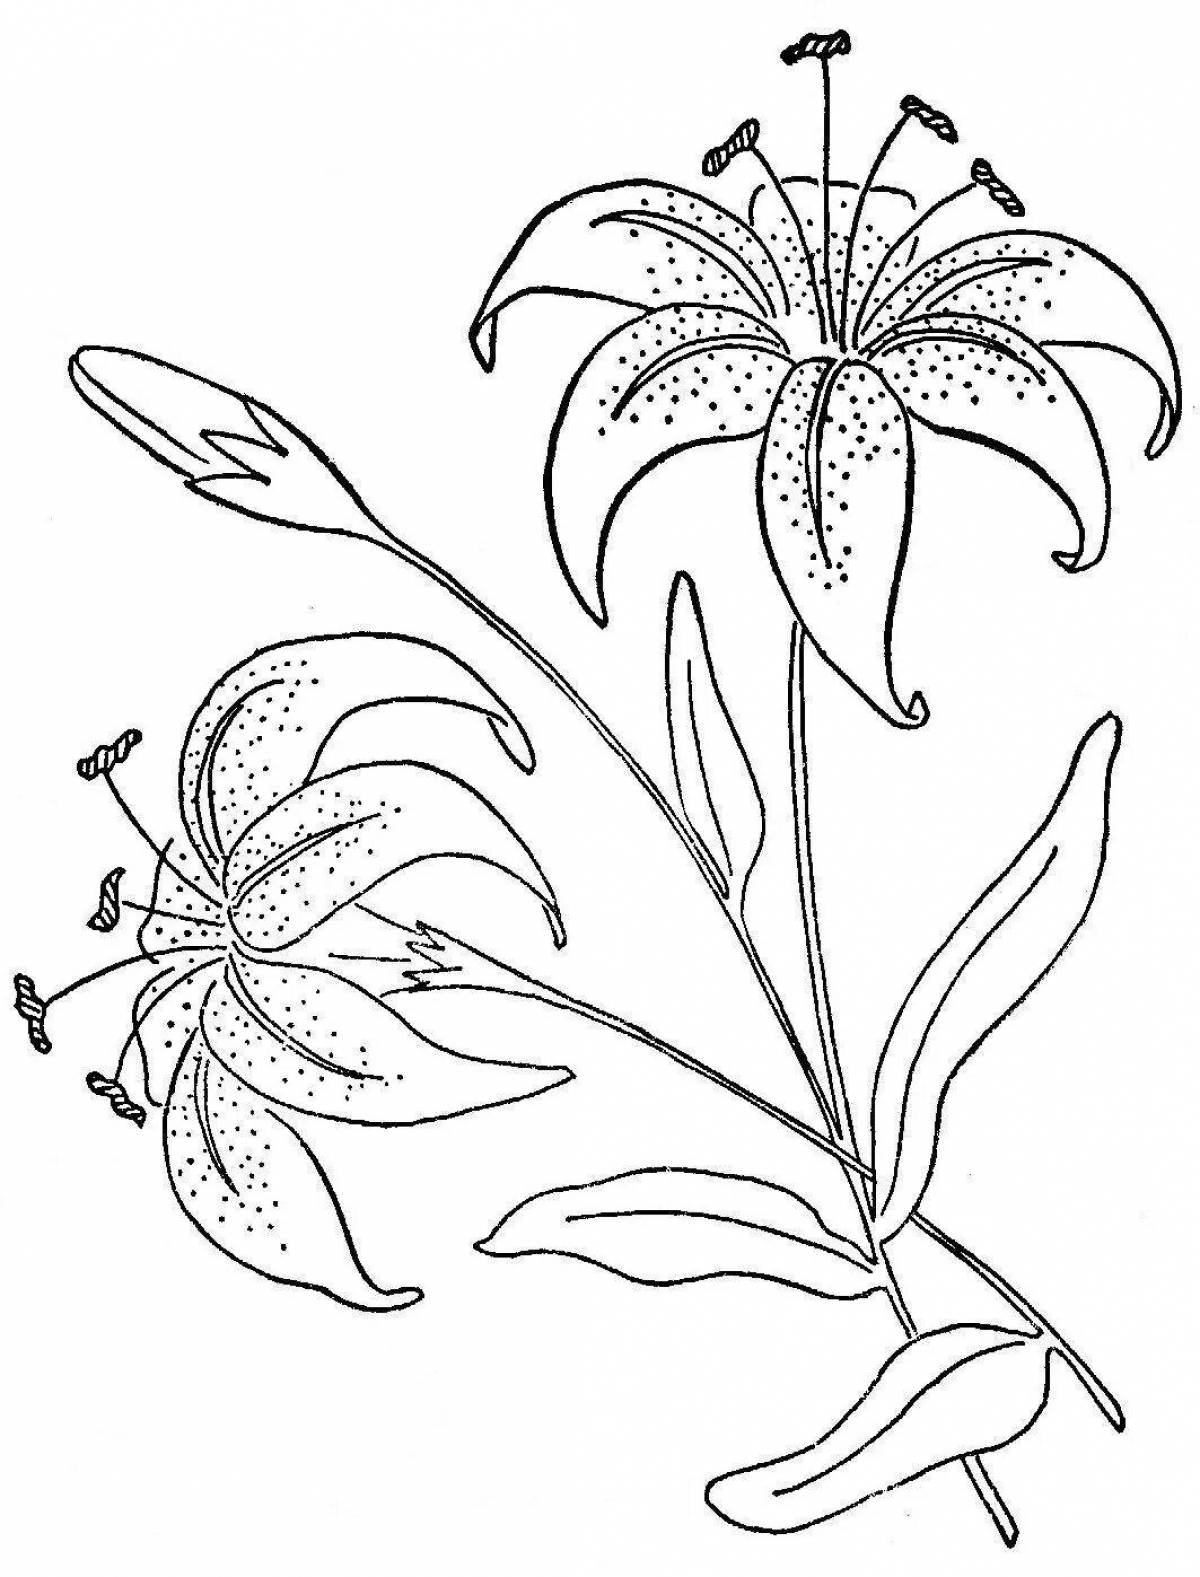 Adorable sea lily coloring page